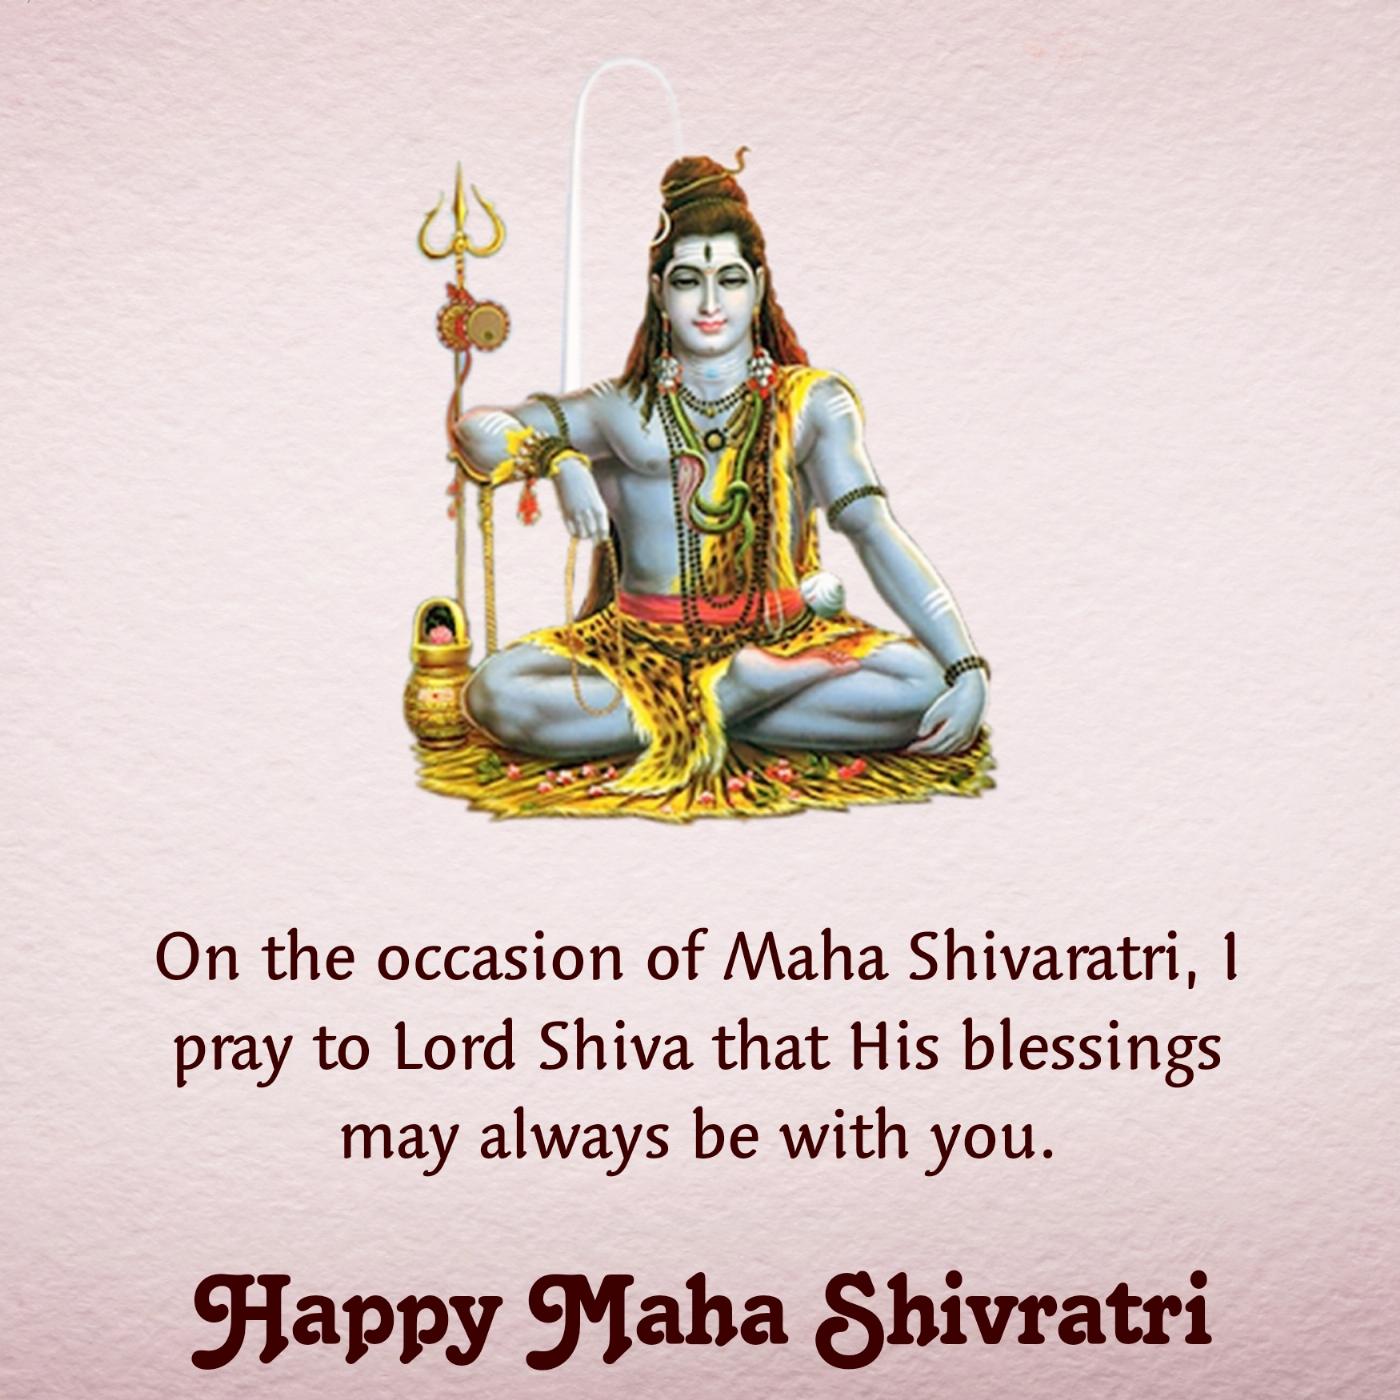 On the occasion of Maha Shivratri I extend my warm wishes to you